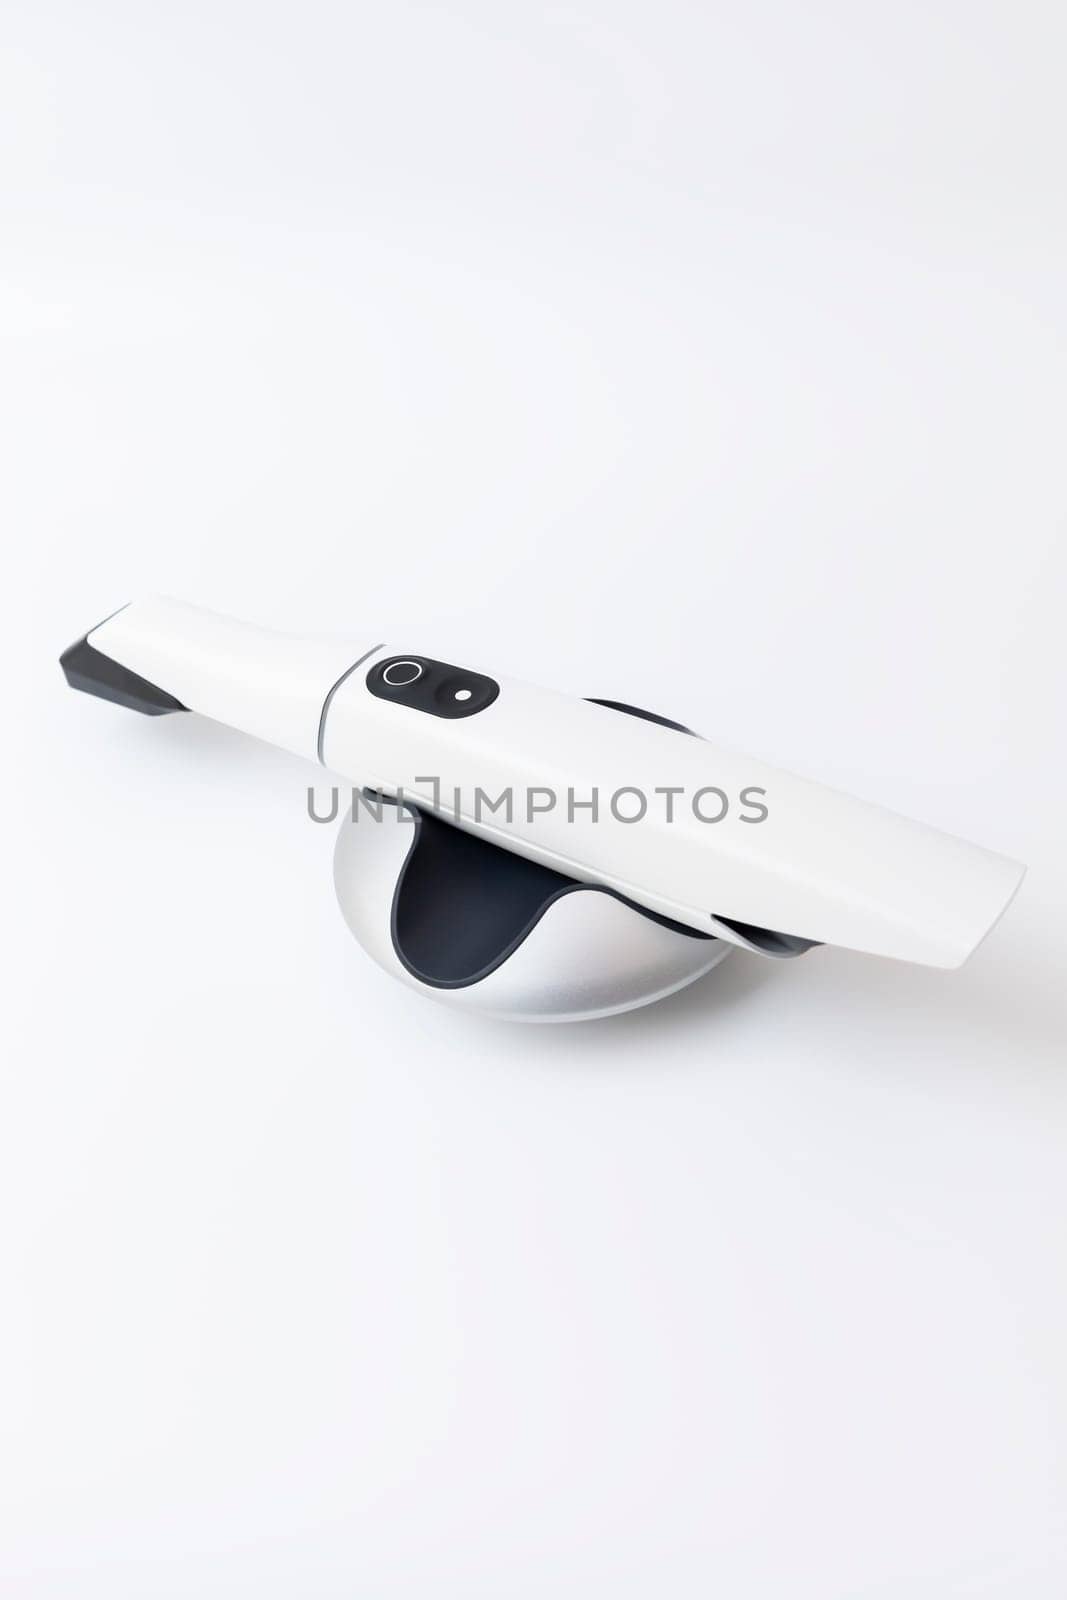 Isolated White 3d Dental Tooth Scanner On White Background. Dental Intraoral Equipment, Device For Scanning Teeth. Dentistry And Health Care Concept . Vertical Flat Lay View, by netatsi